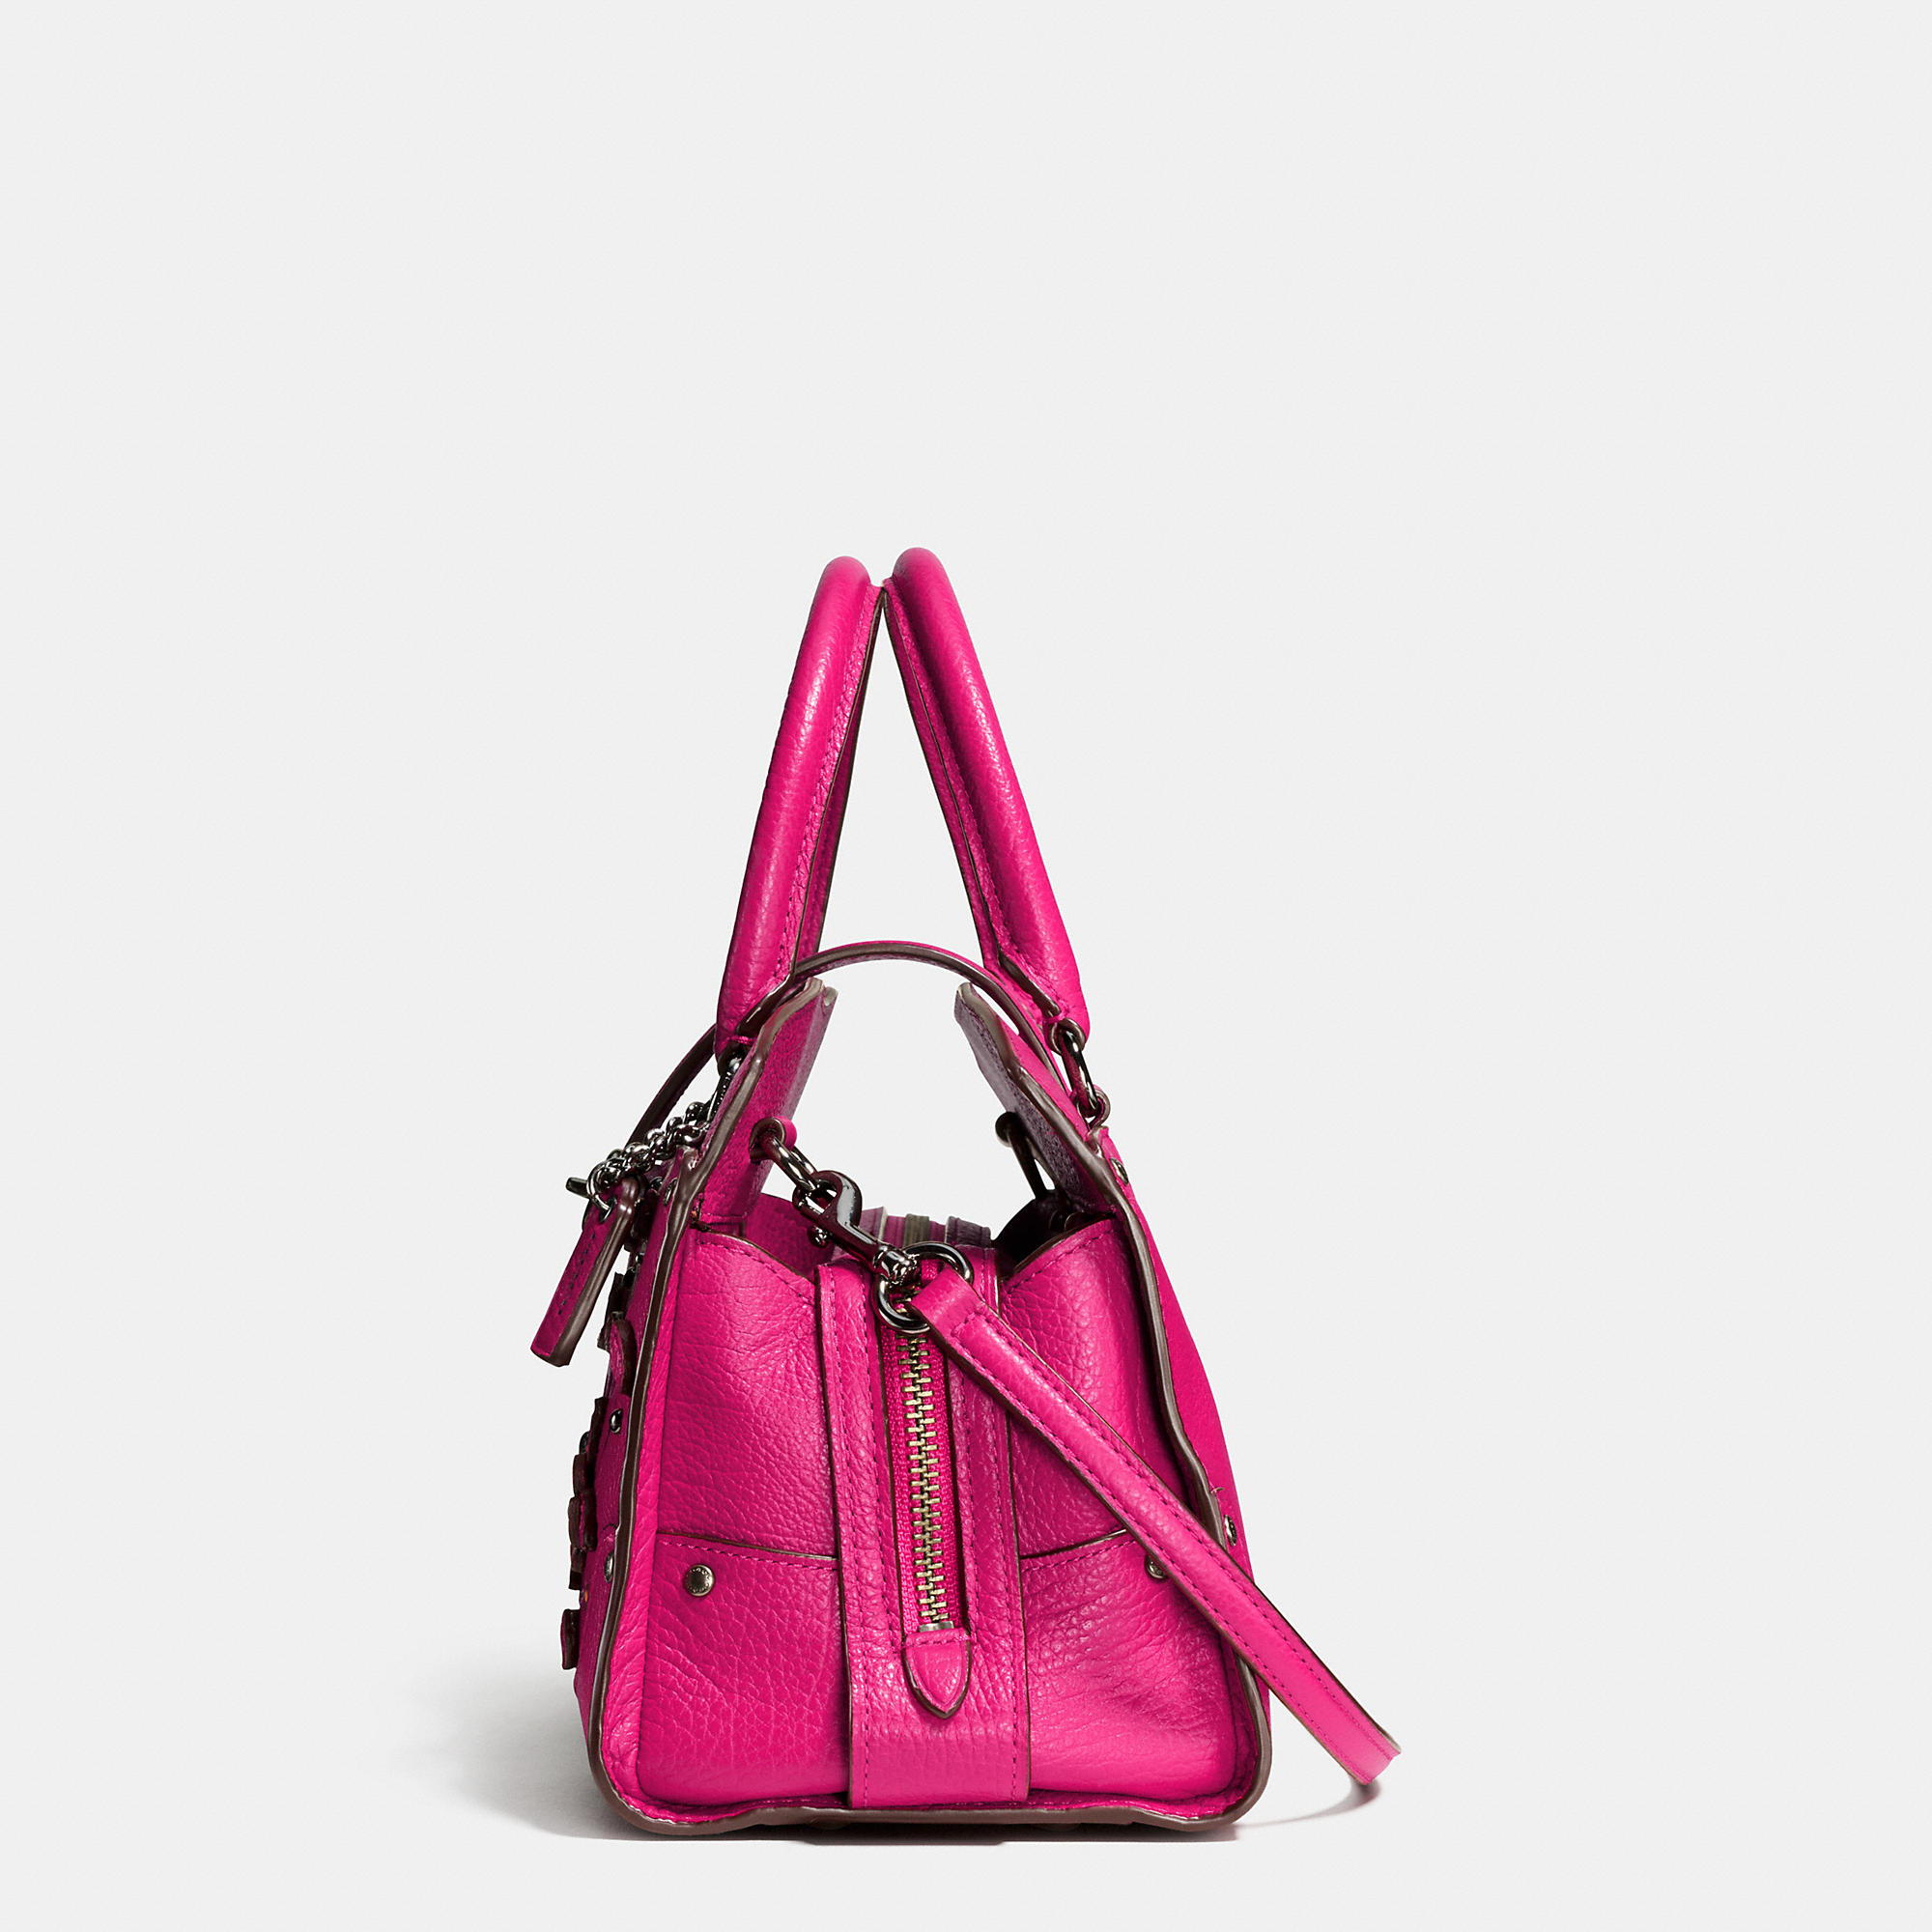 COACH Willow Floral Mercer Satchel 24 In Grain Leather in Pink - Lyst